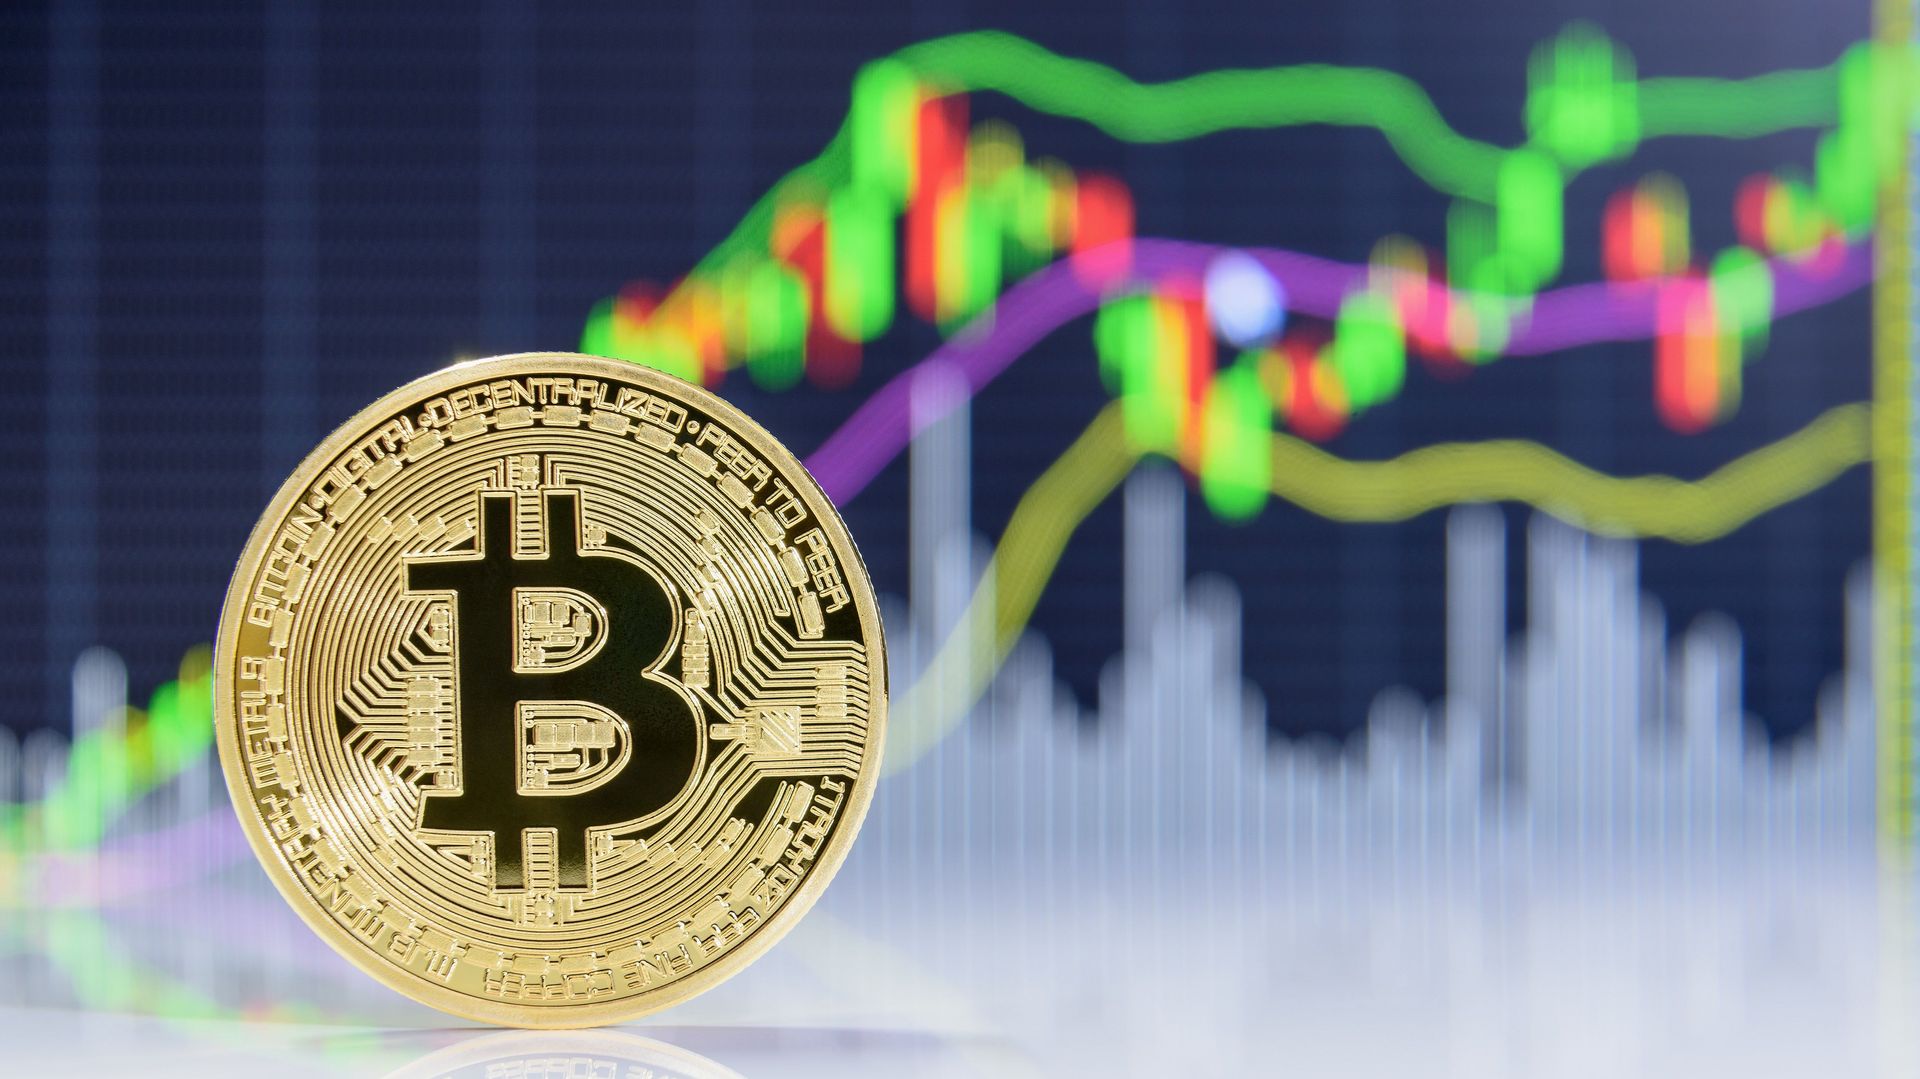 Bitcoin Consolidates, Altcoins Mixed as Investors Weigh Inflation Data